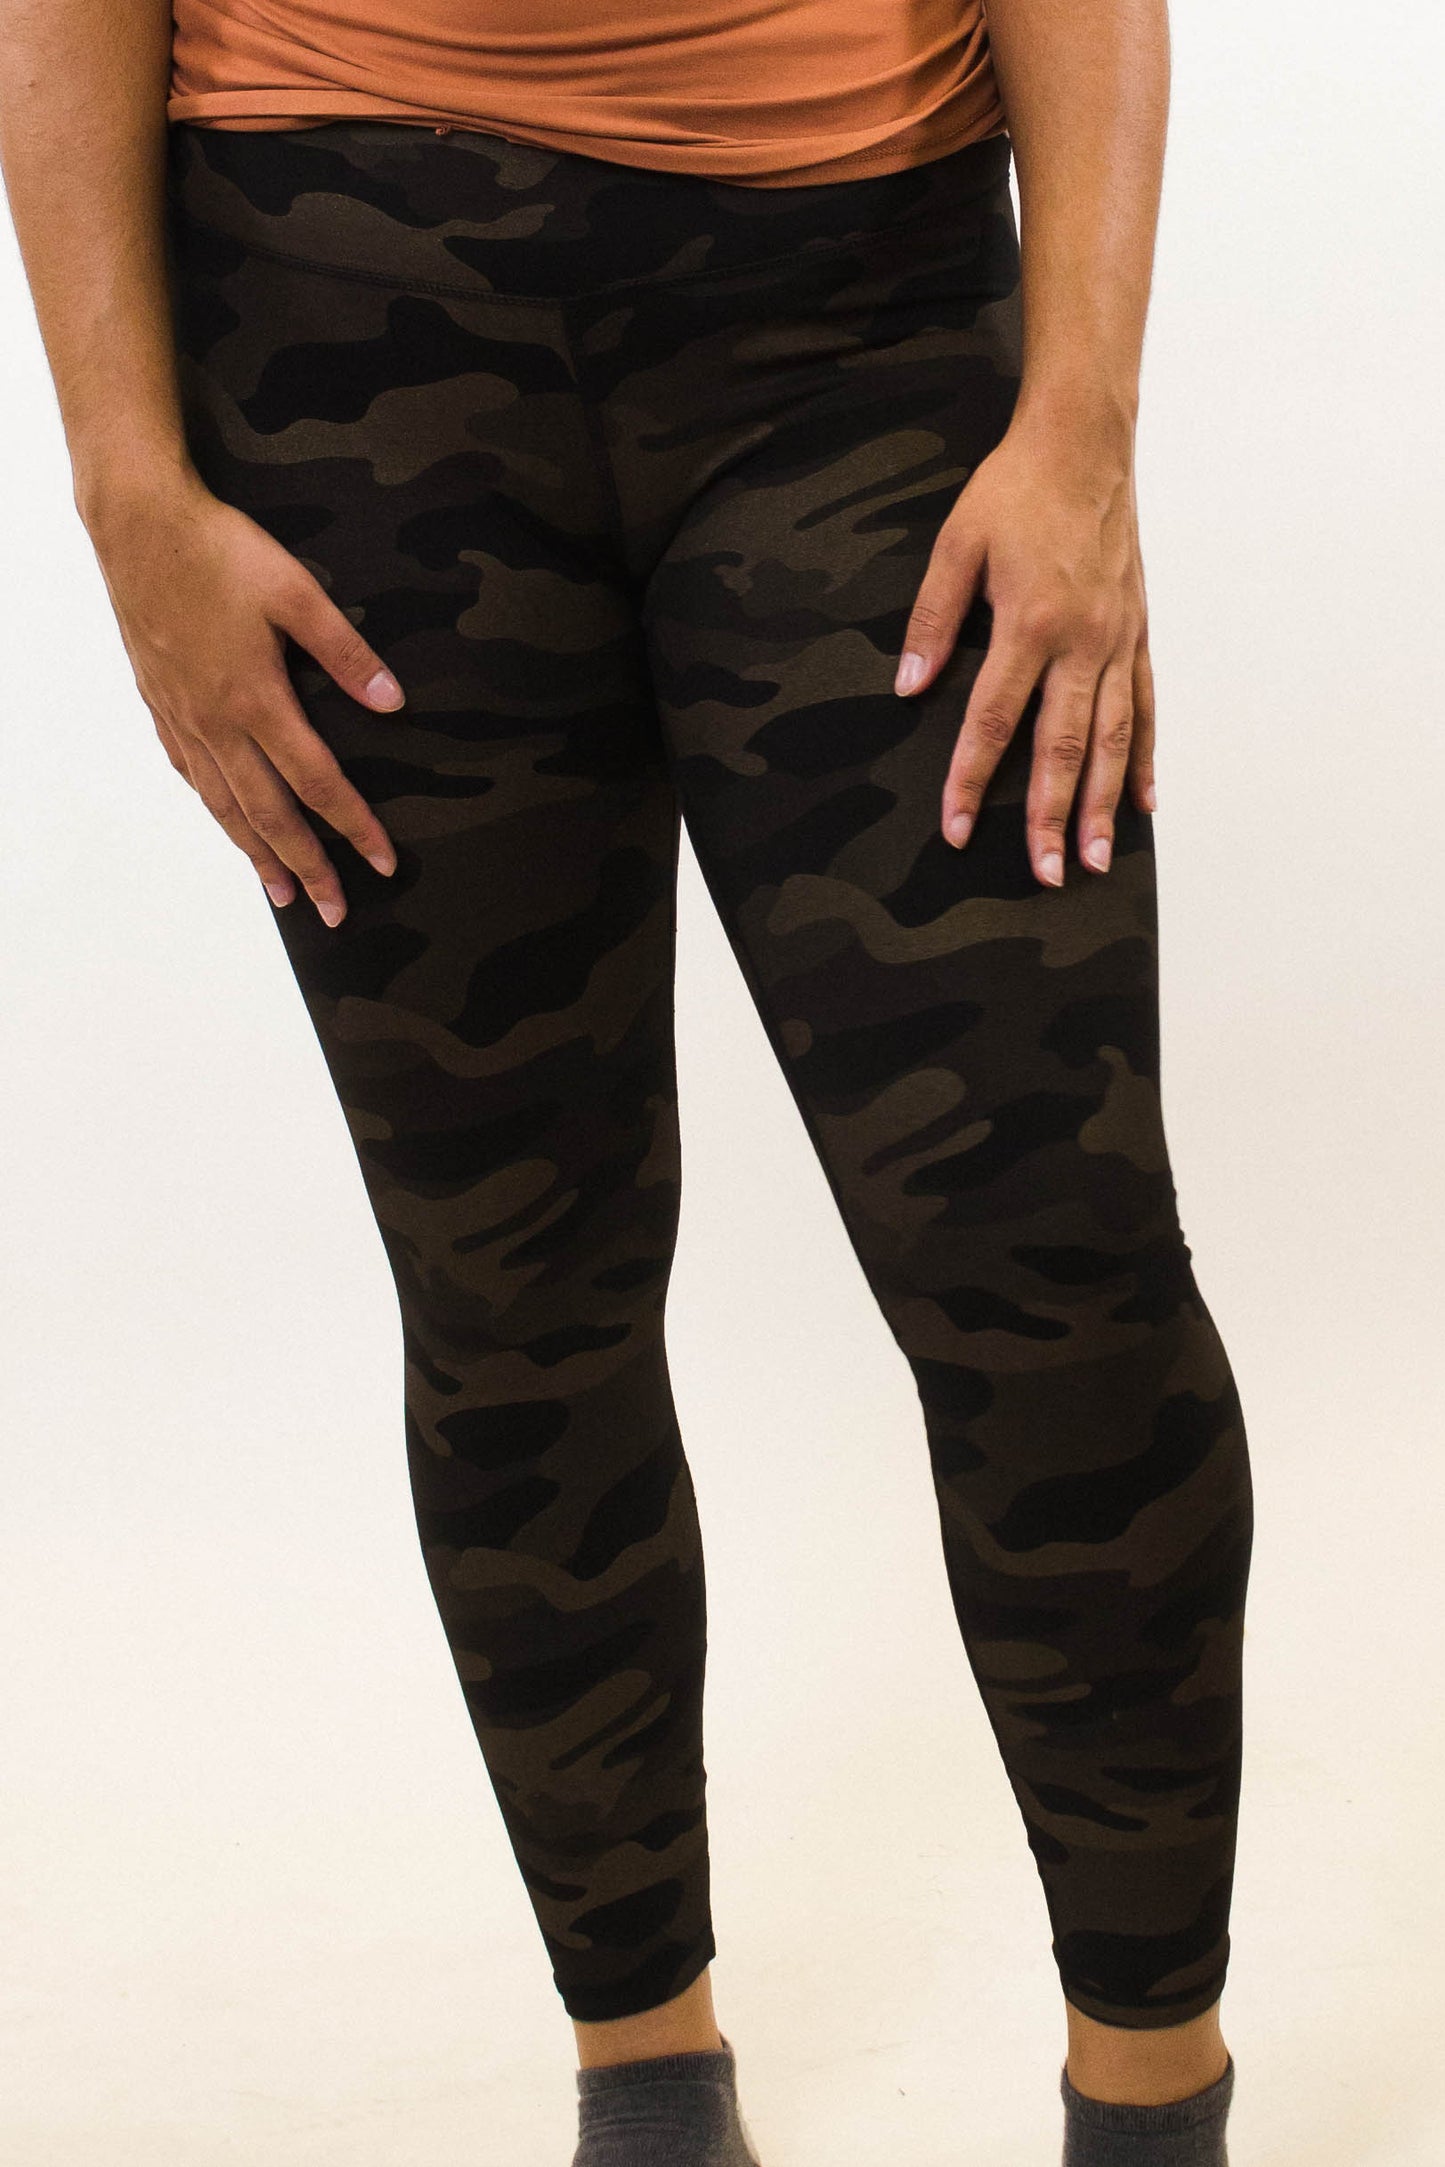 Foil Printed Camo Leggings with Coin Pocket